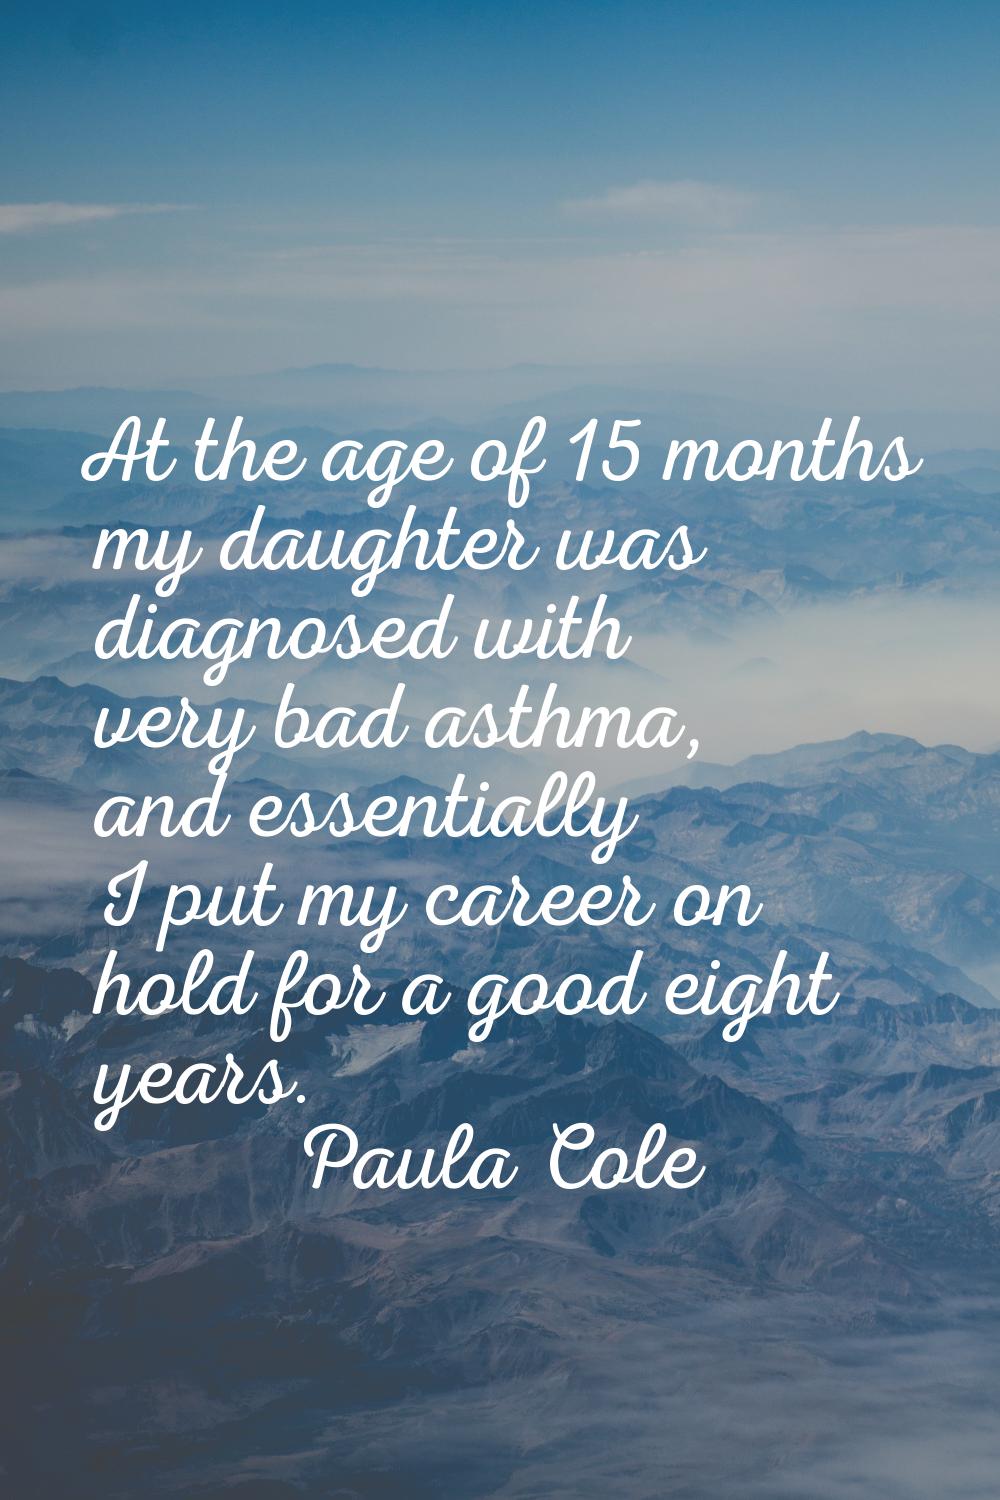 At the age of 15 months my daughter was diagnosed with very bad asthma, and essentially I put my ca